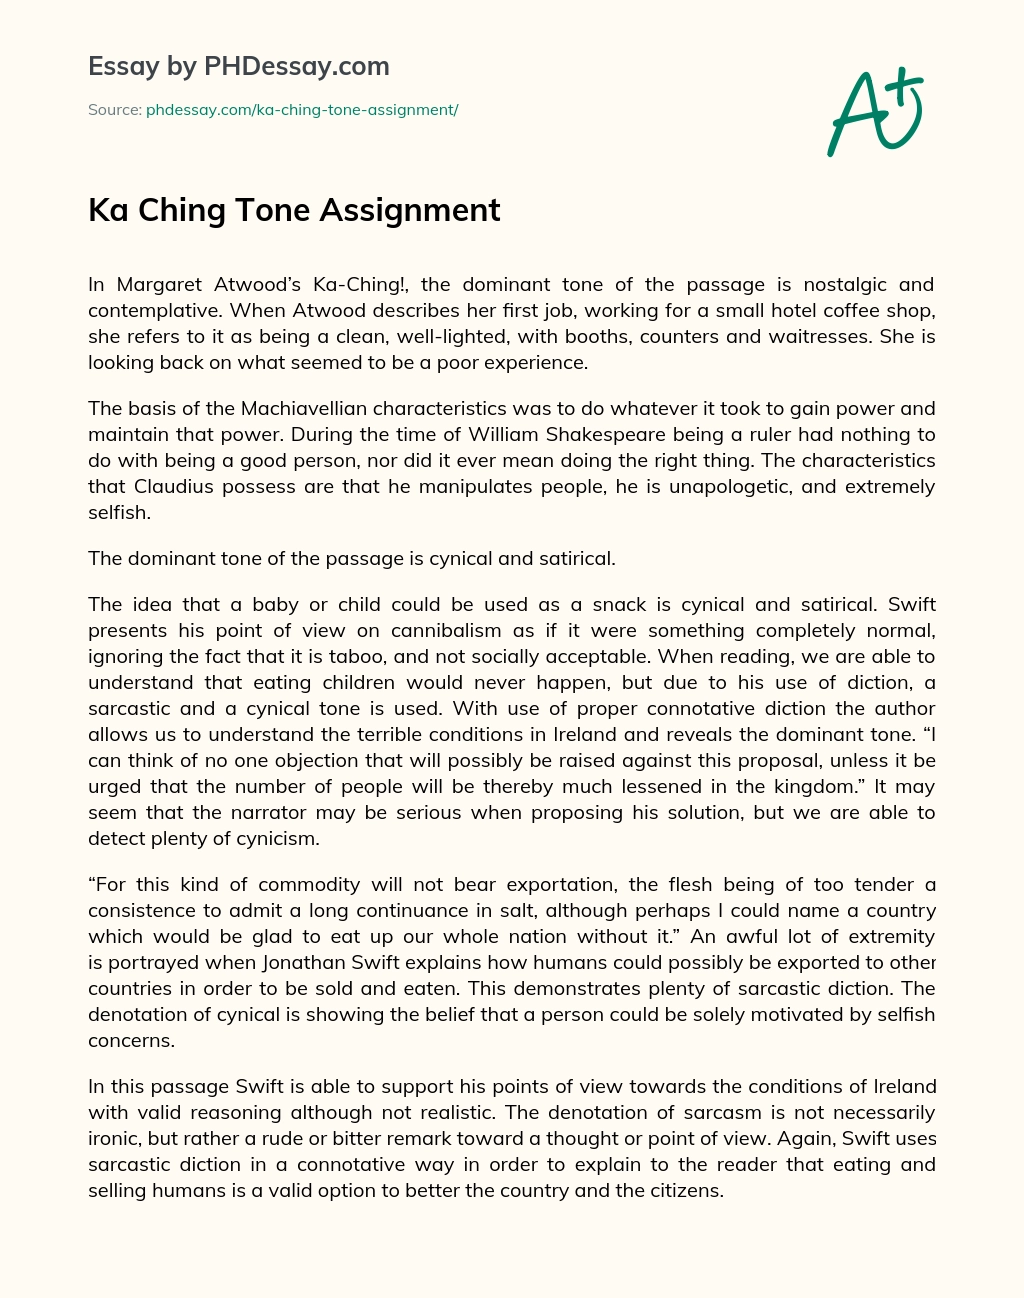 Ka Ching Tone Assignment essay